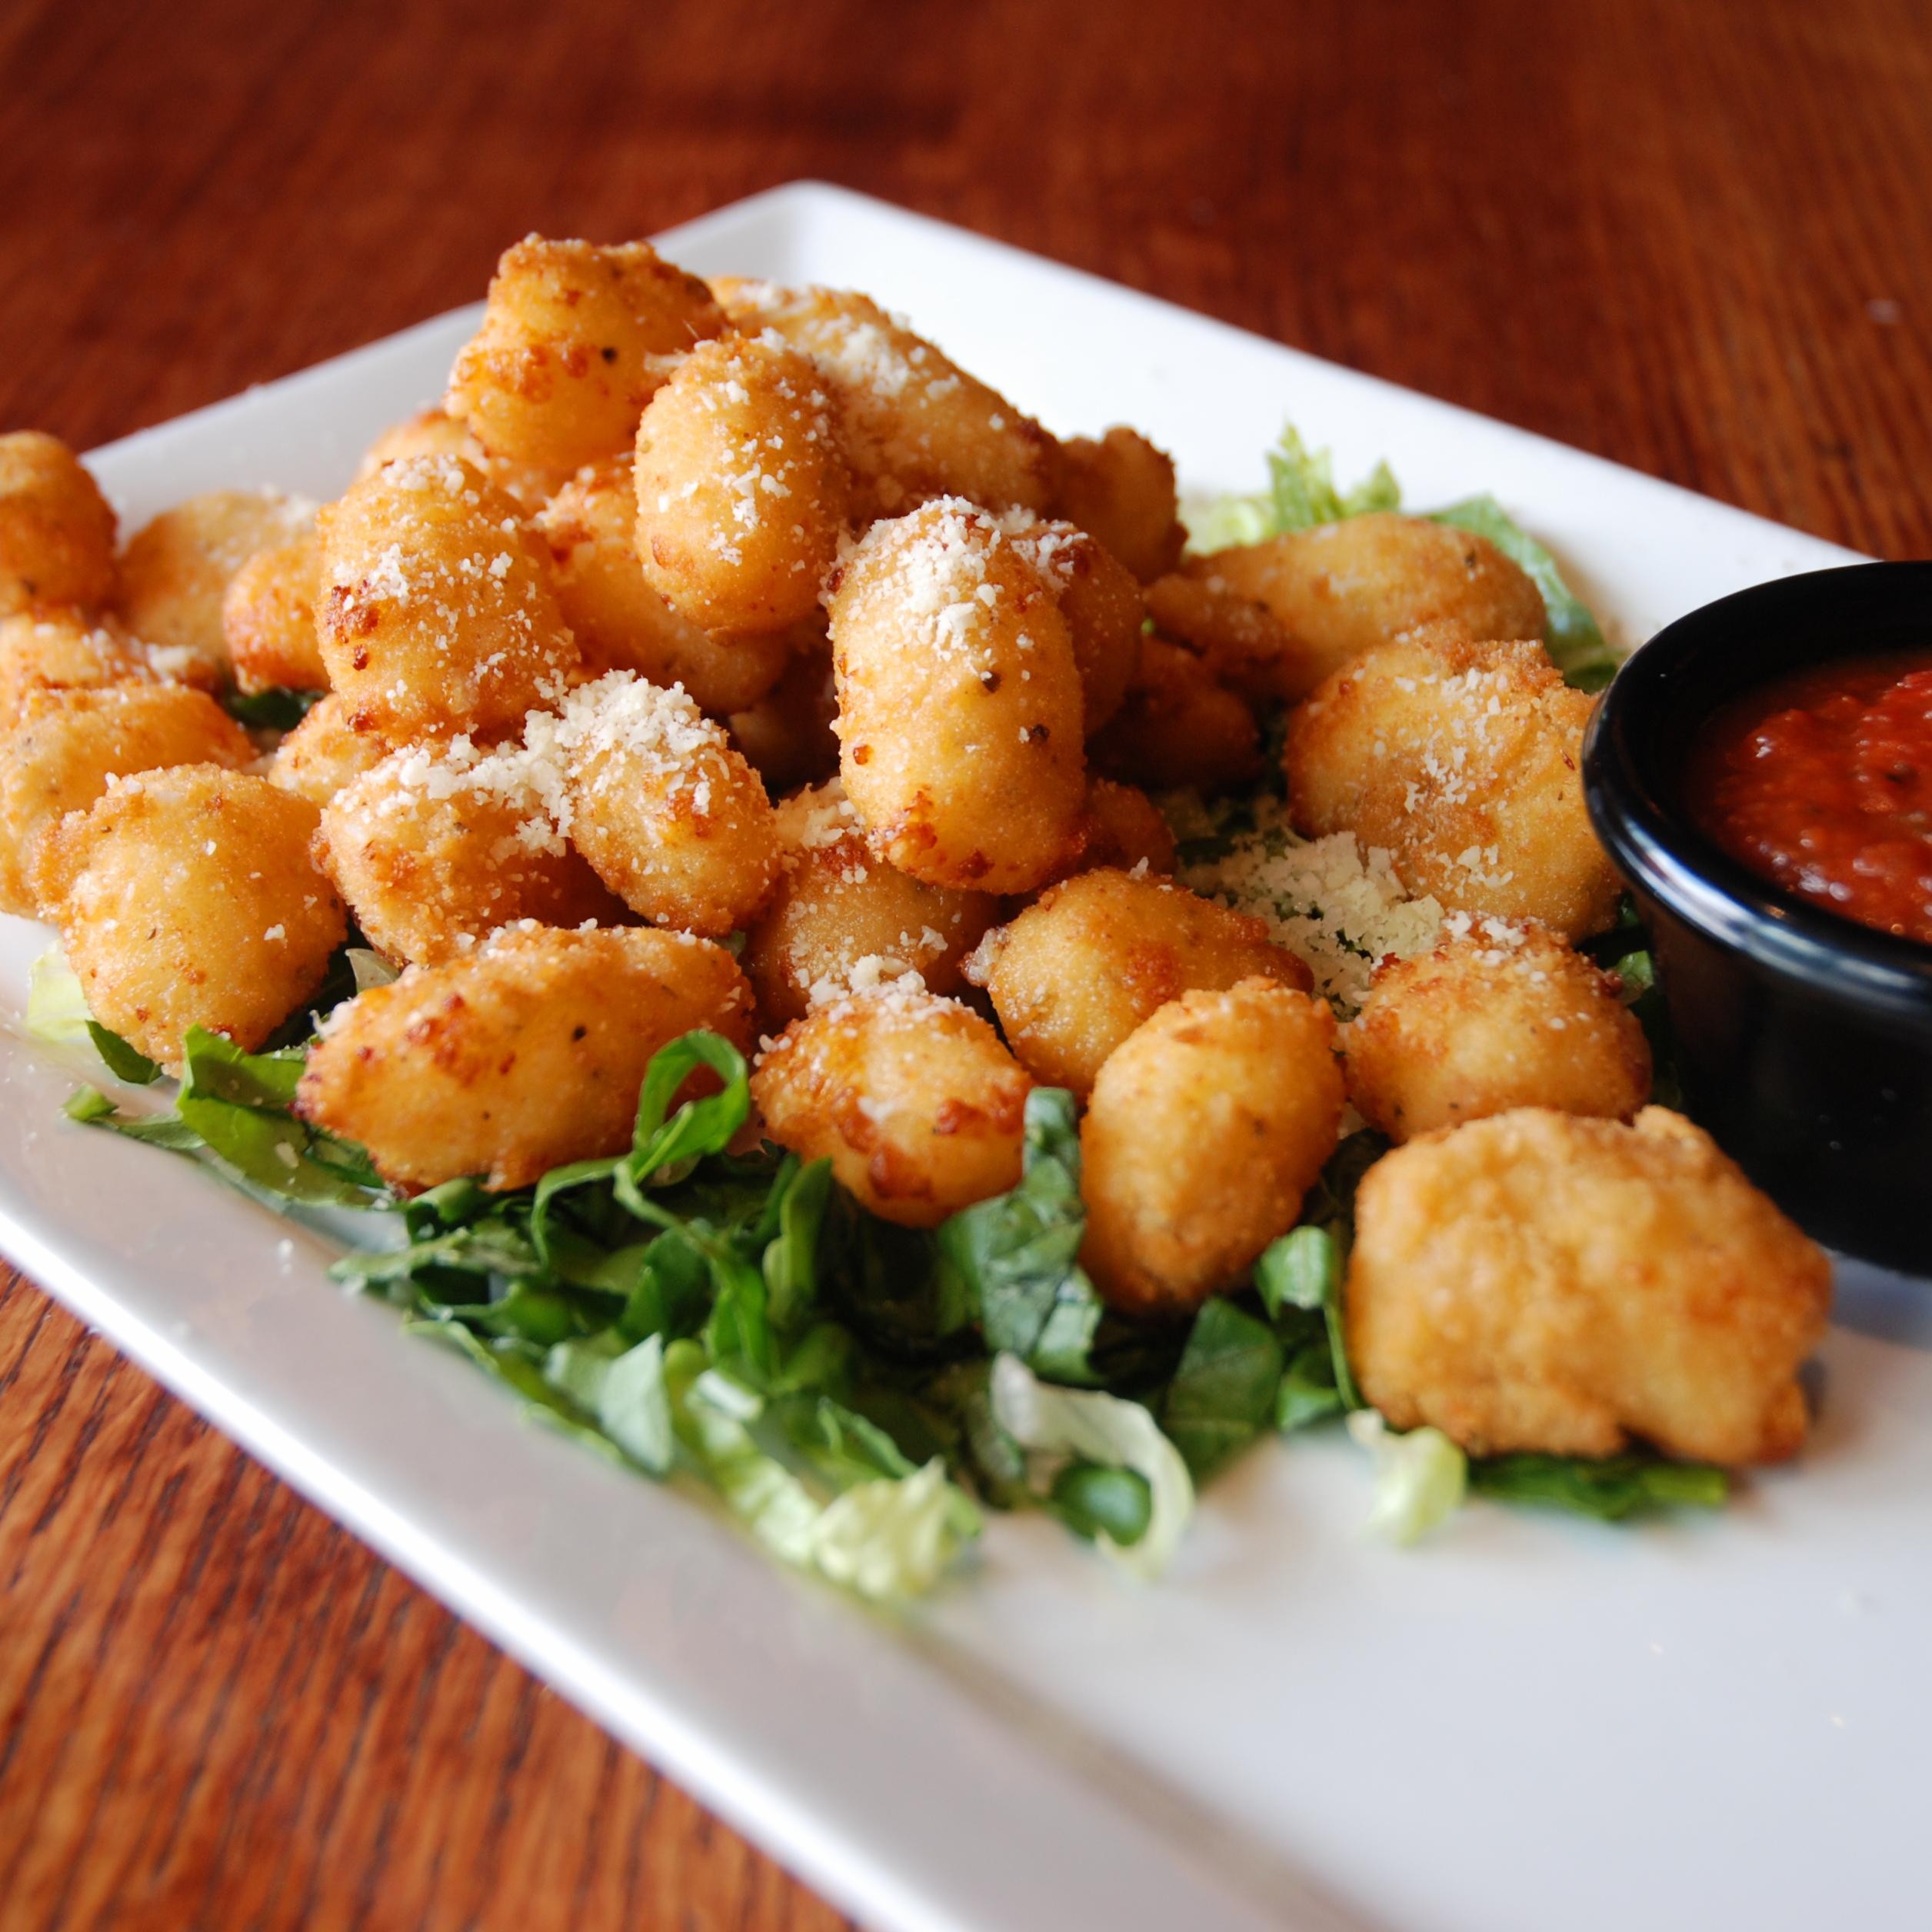 FRESH, SQUEAKY WISCONSIN CHEDDAR CHEESE CURDS